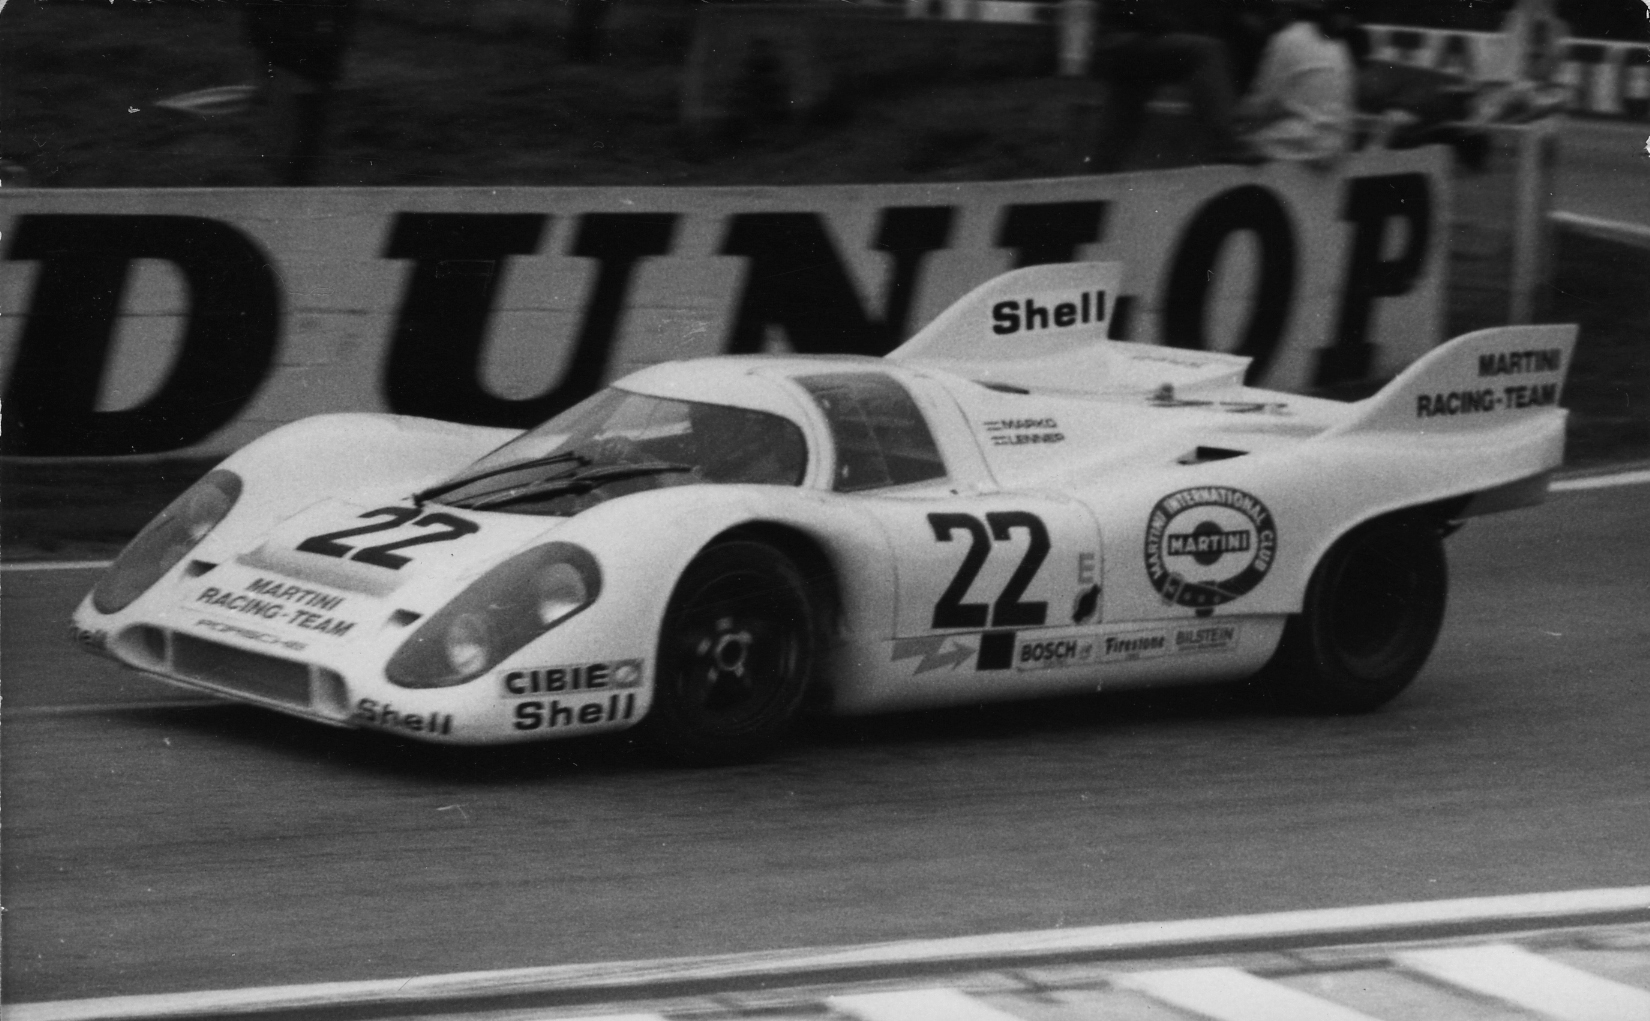 Rain prevented Hans Herrmann and Richard Attwood from beating the distance record during their win in 1970 at the wheel of a 917. That would take until the following year.